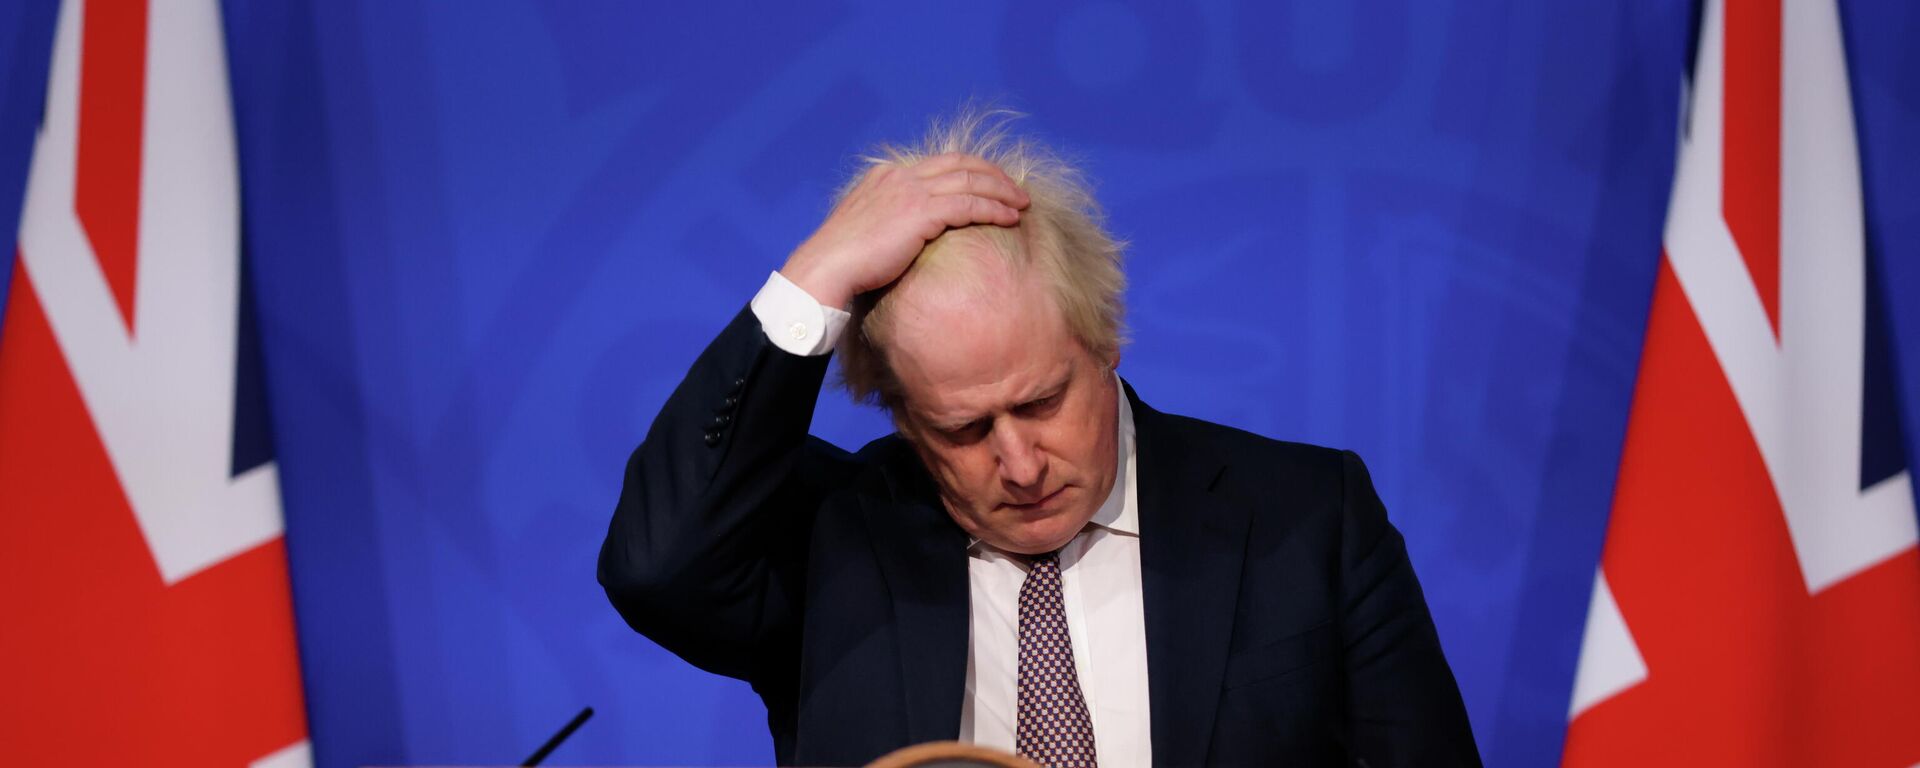 Britain's Prime Minister Boris Johnson gestures as he speaks during a press conference in London, Saturday Nov. 27, 2021, after cases of the new COVID-19 variant were confirmed in the UK - Sputnik International, 1920, 12.12.2021